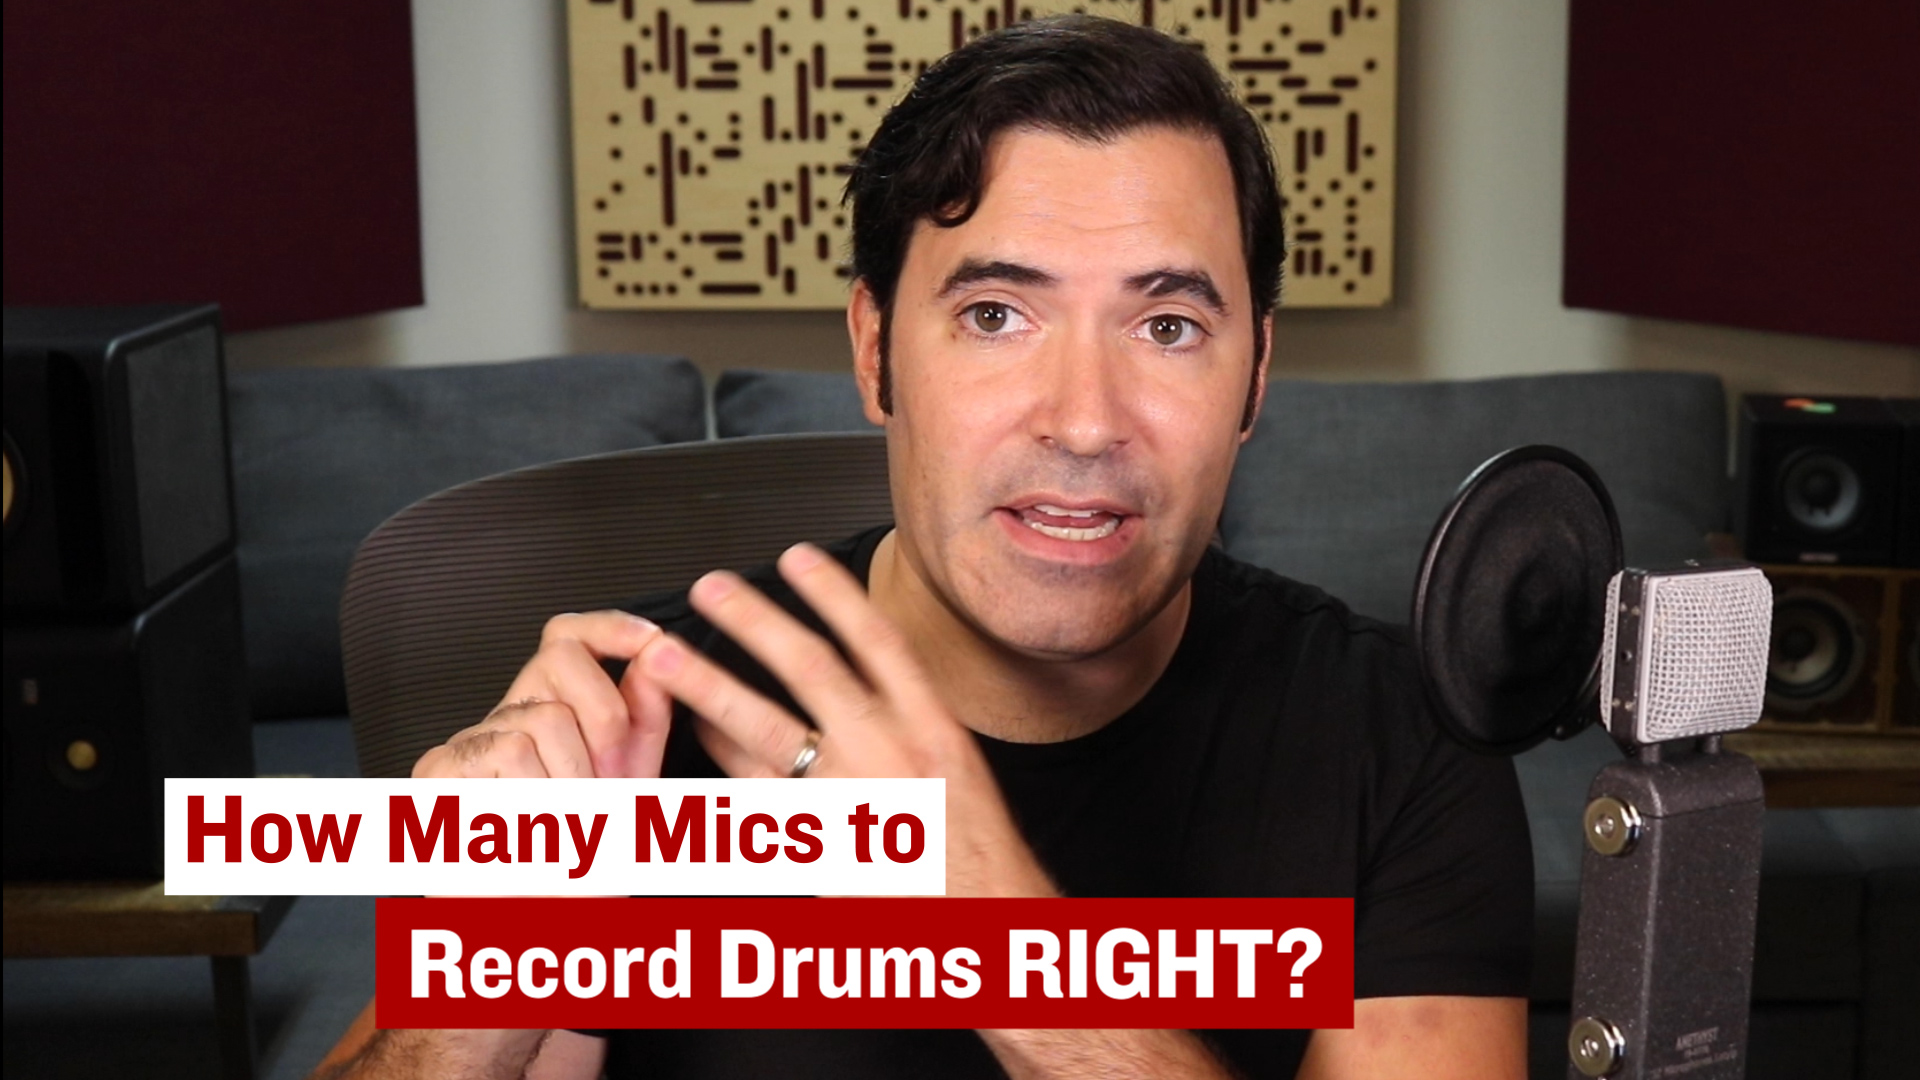 How Many Mics Do You Really Need to Record Drums?